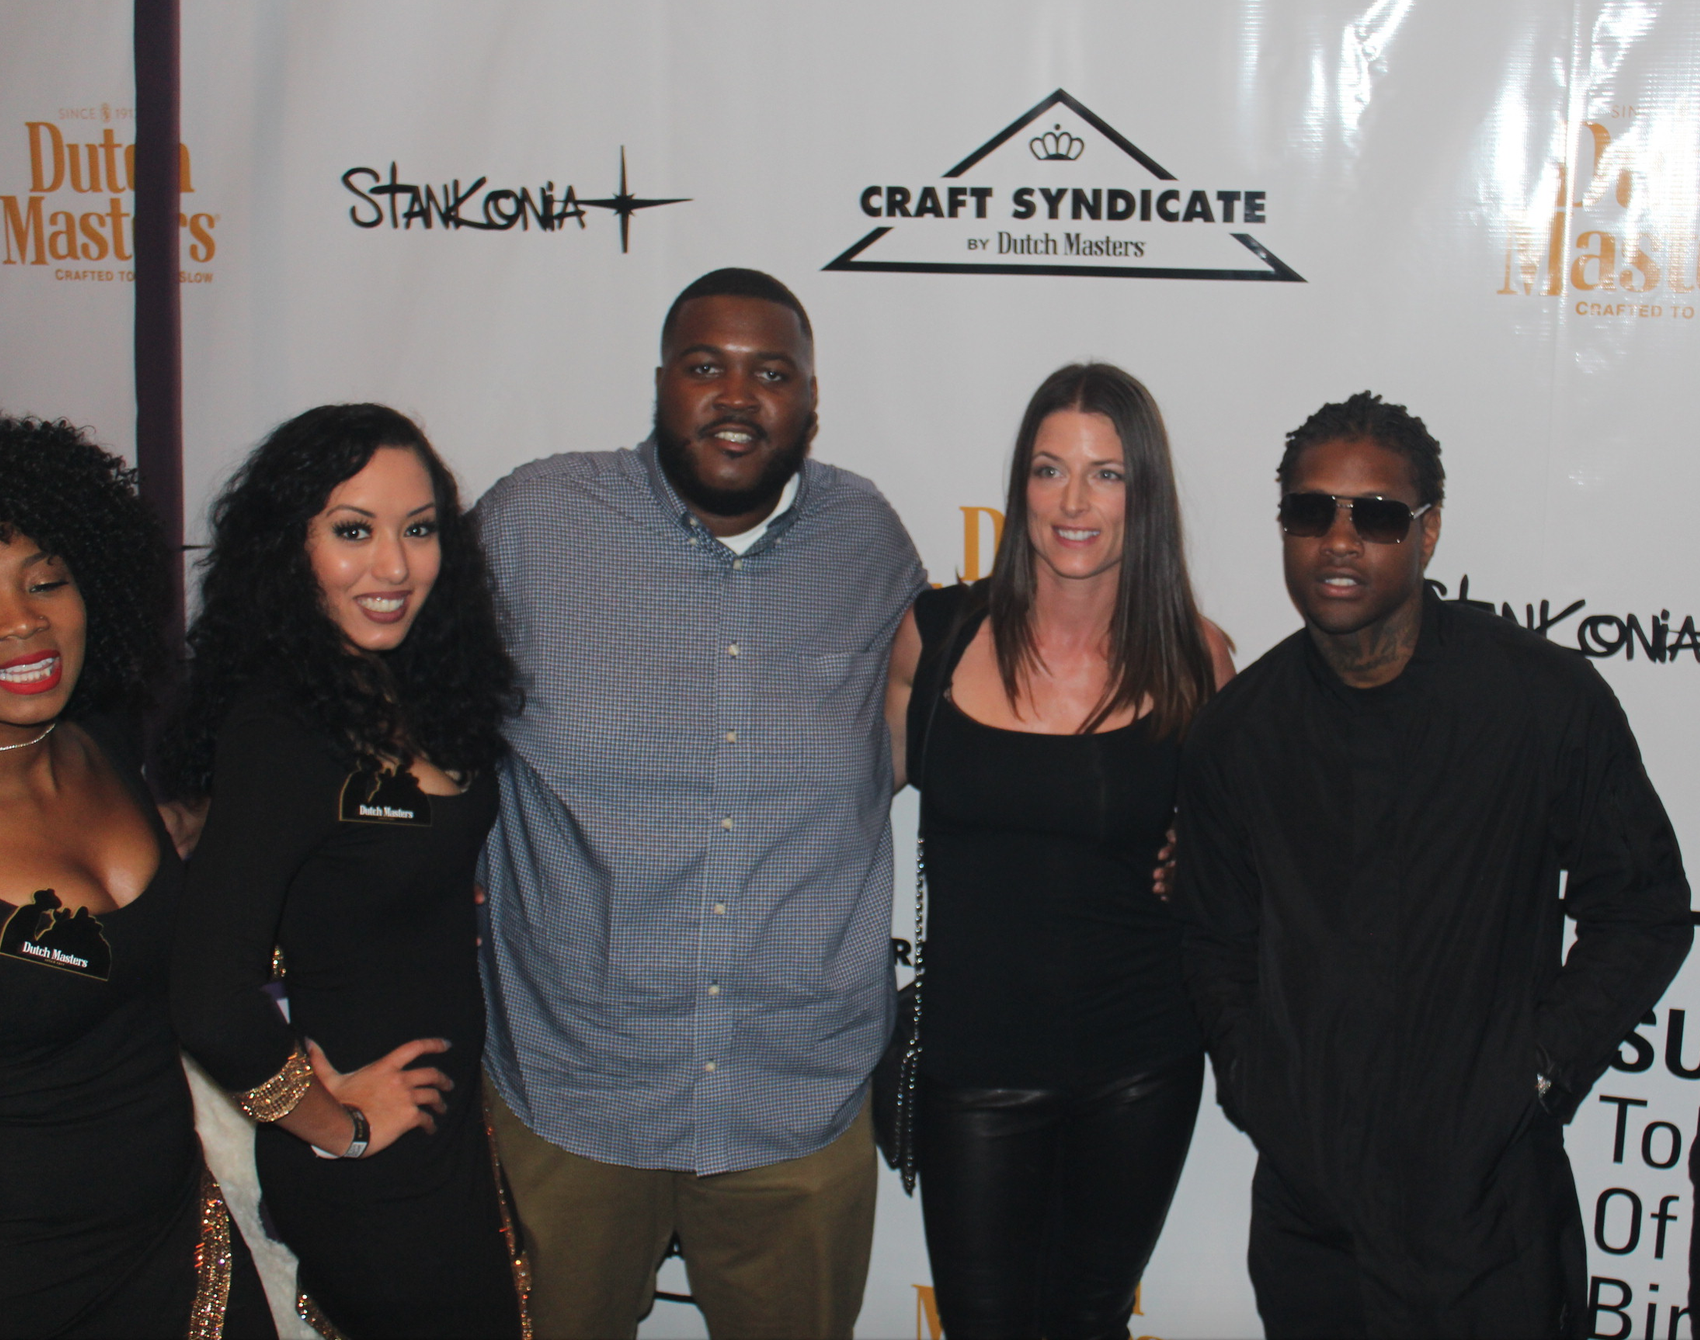 DutchMasters Models pose with winners Kofi the Bandit, Sarah with Craft Syndicate and Lil Durk Photo Credit Jonell Media PR